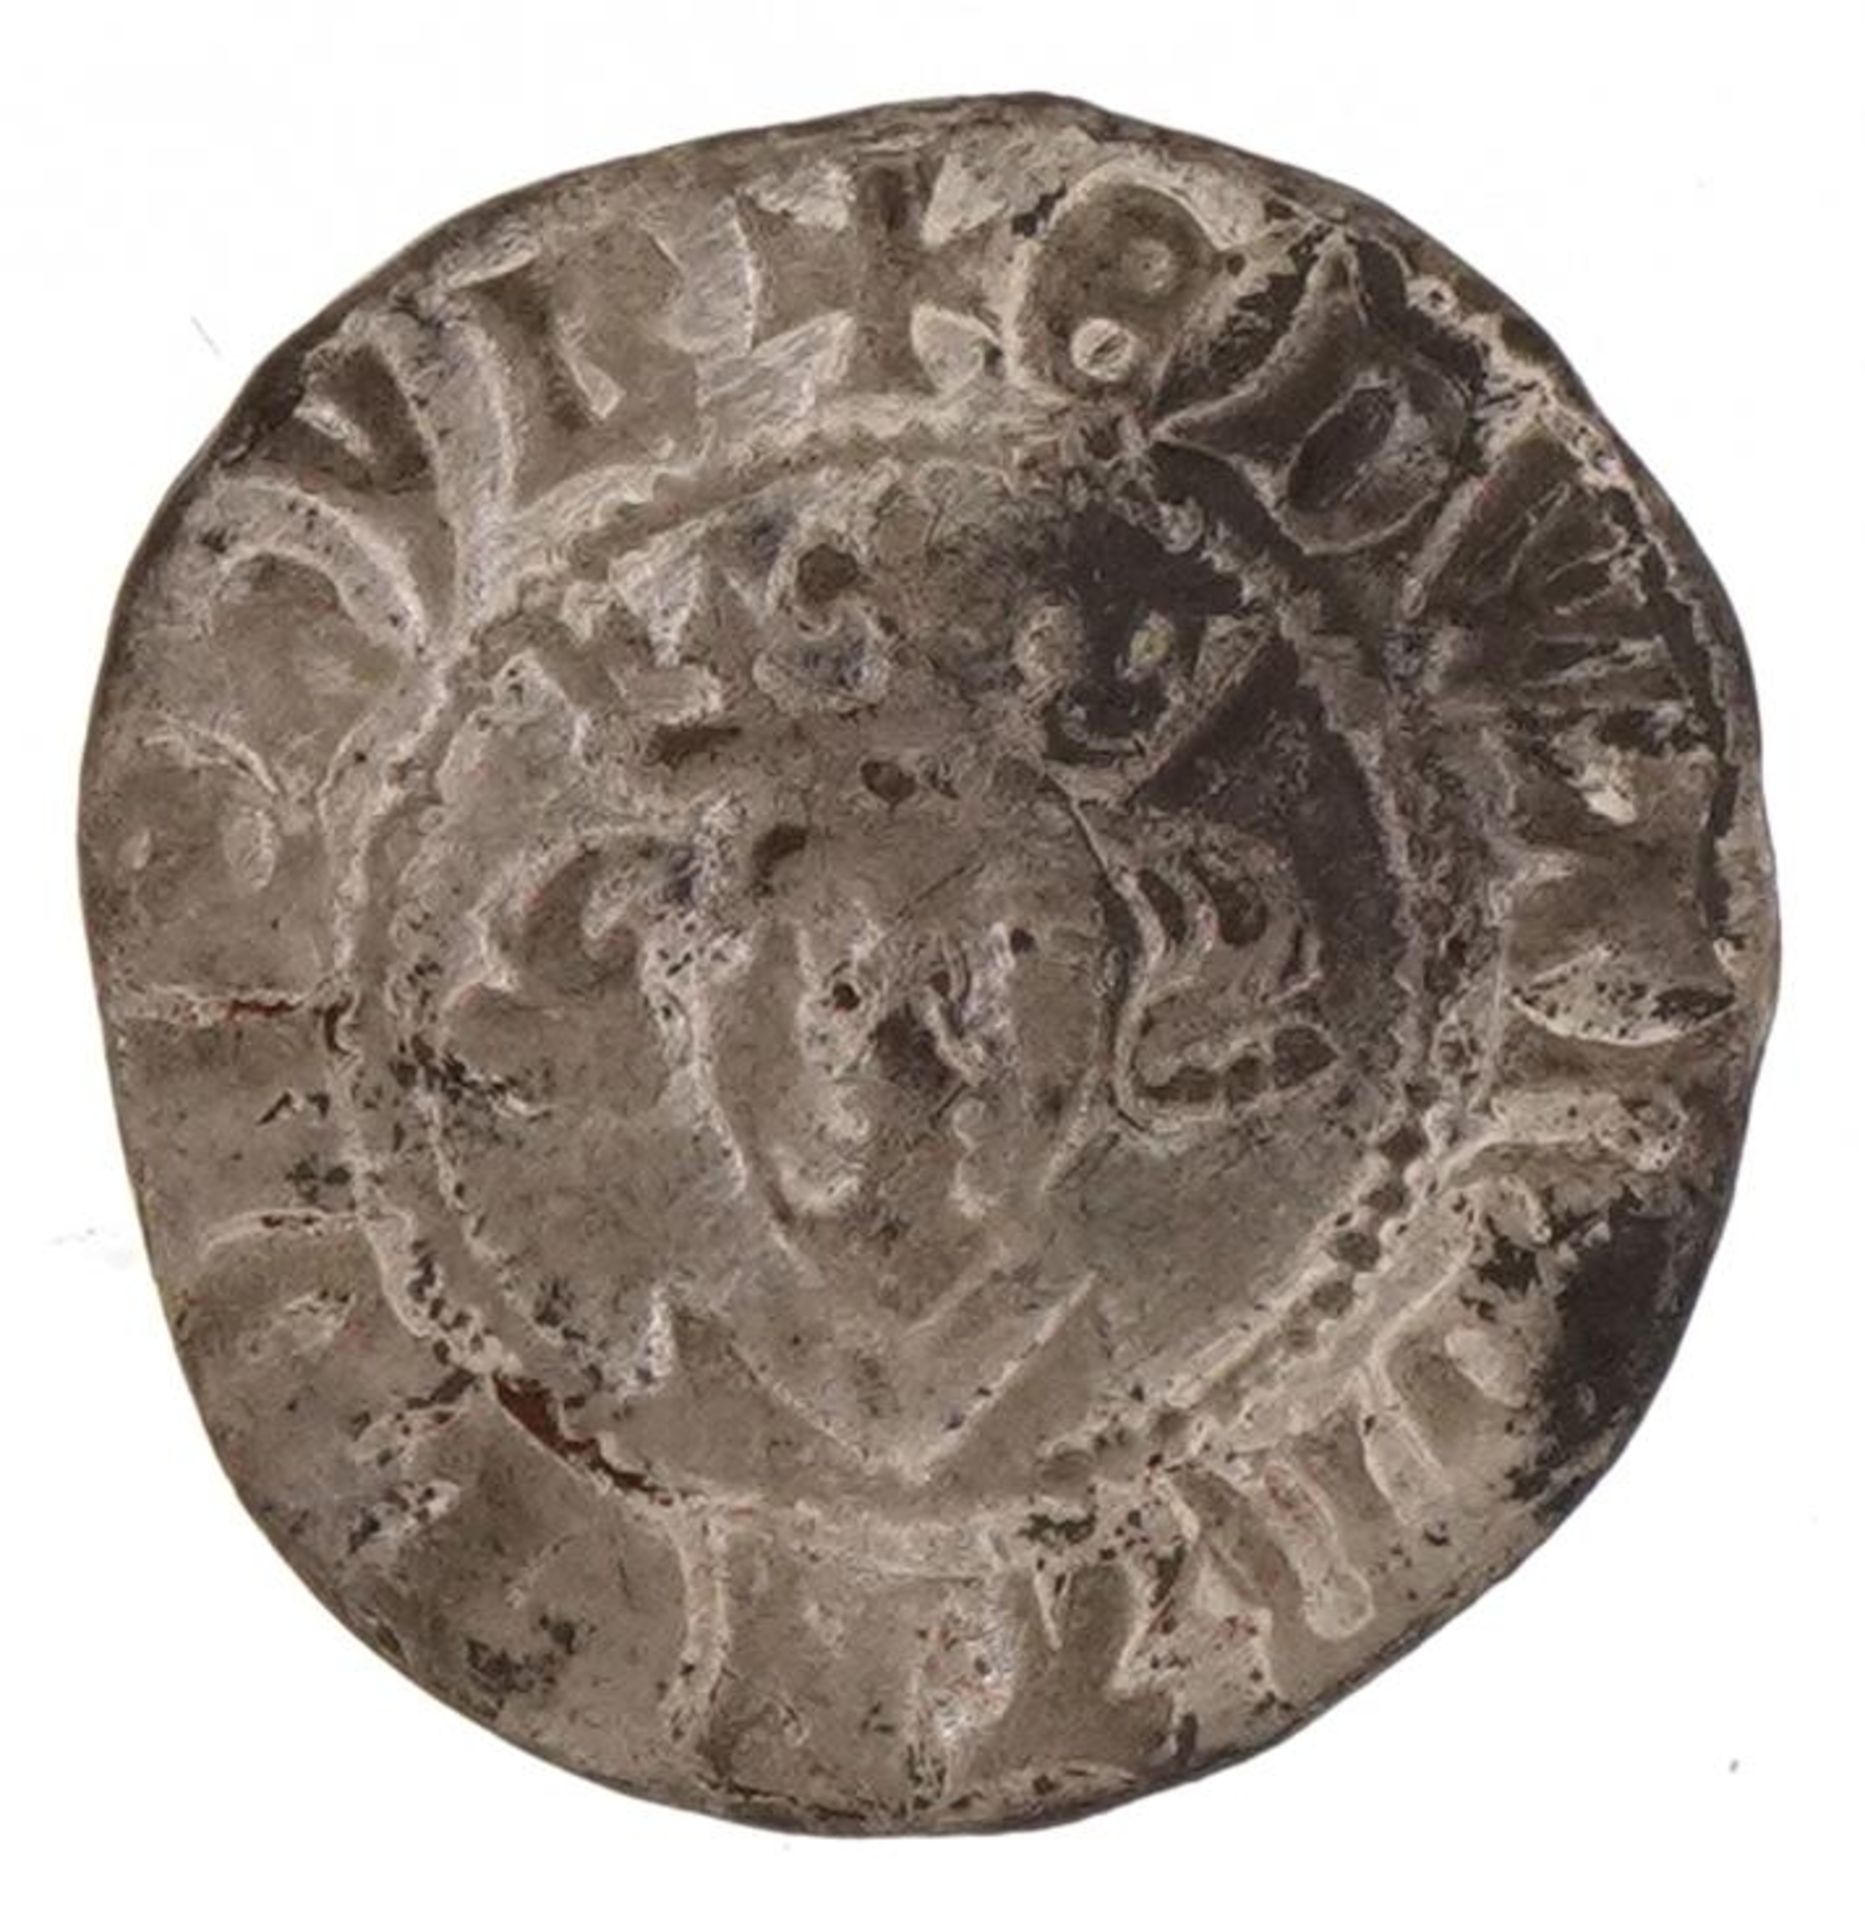 Edward I or II hammered silver penny : For further information on this lot please visit